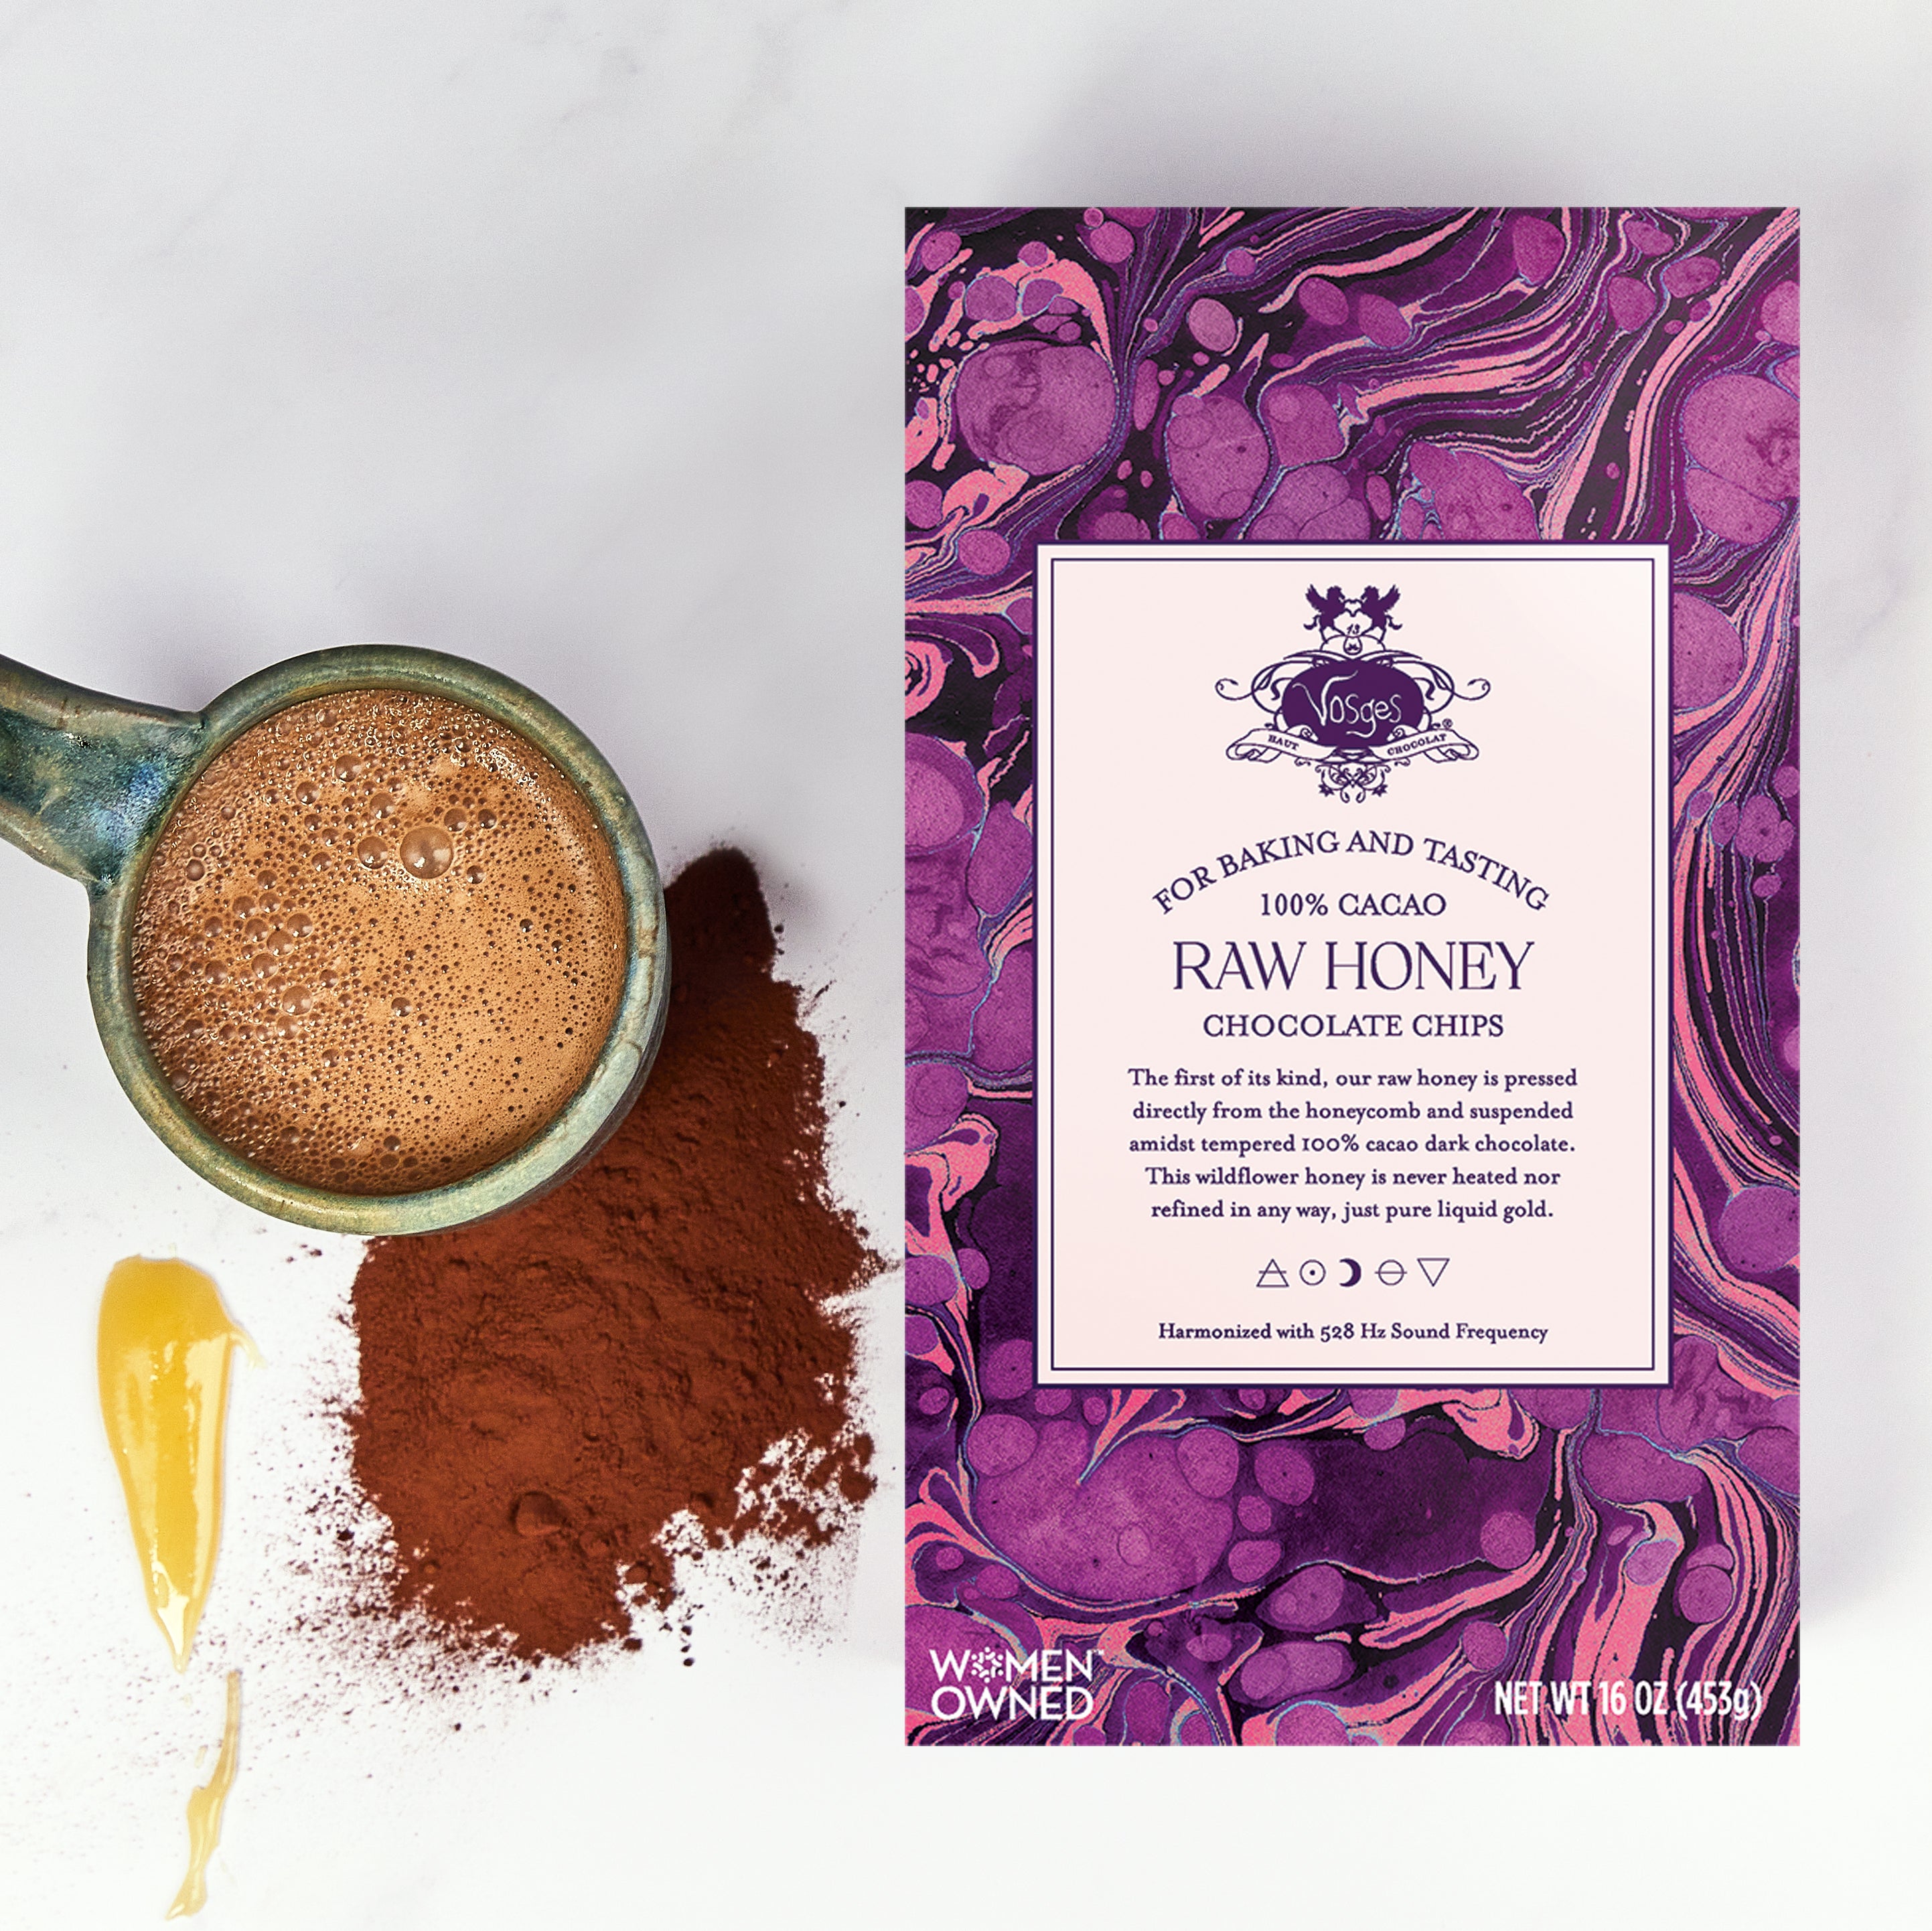 vosges-haut-chocolat-blog/introducing-vhc-pantry-for-baking-tasting-snacking-more